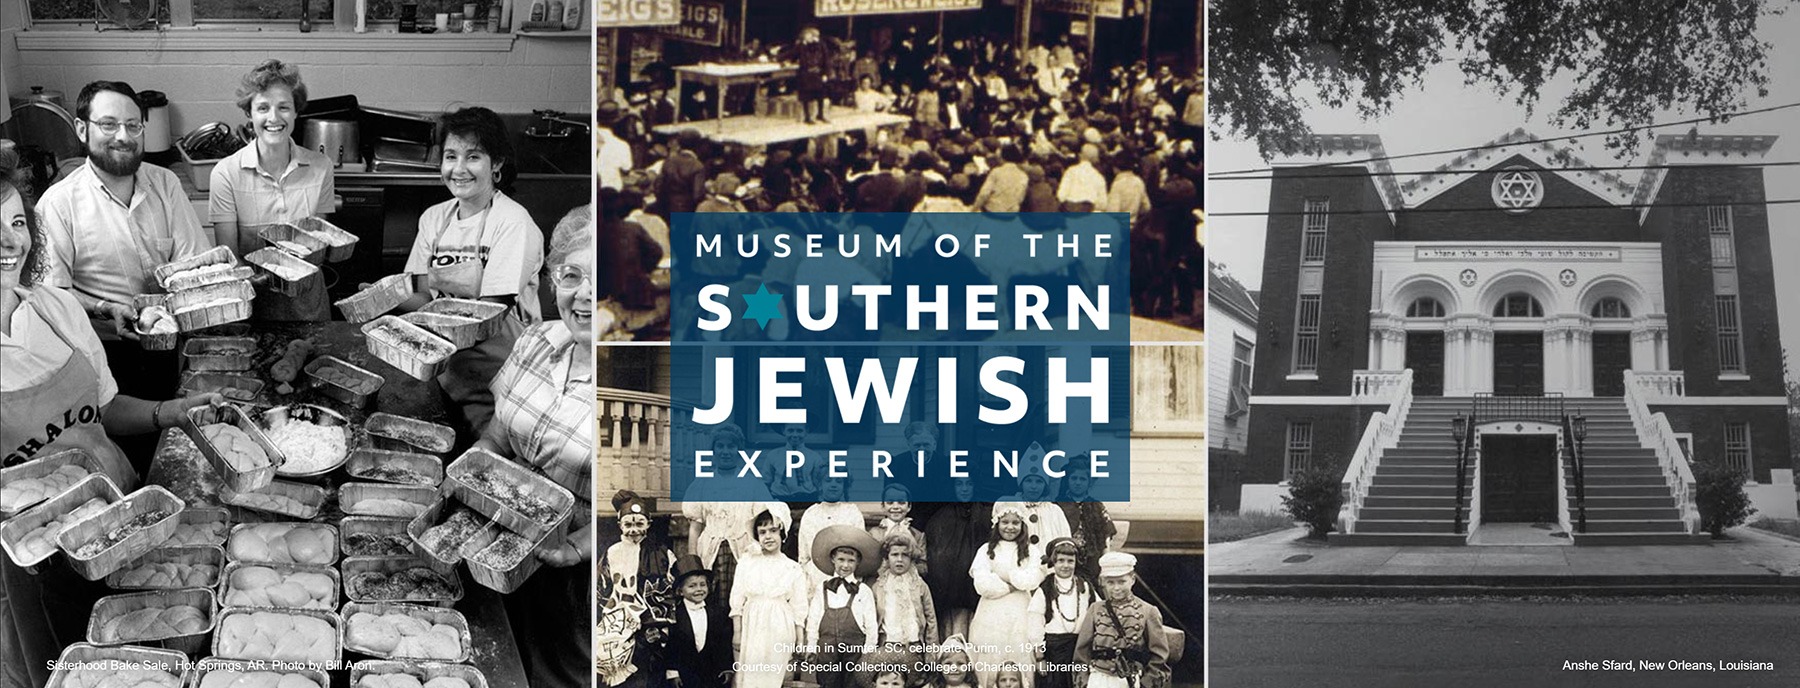 Museum of the Southern Jewish Experience 